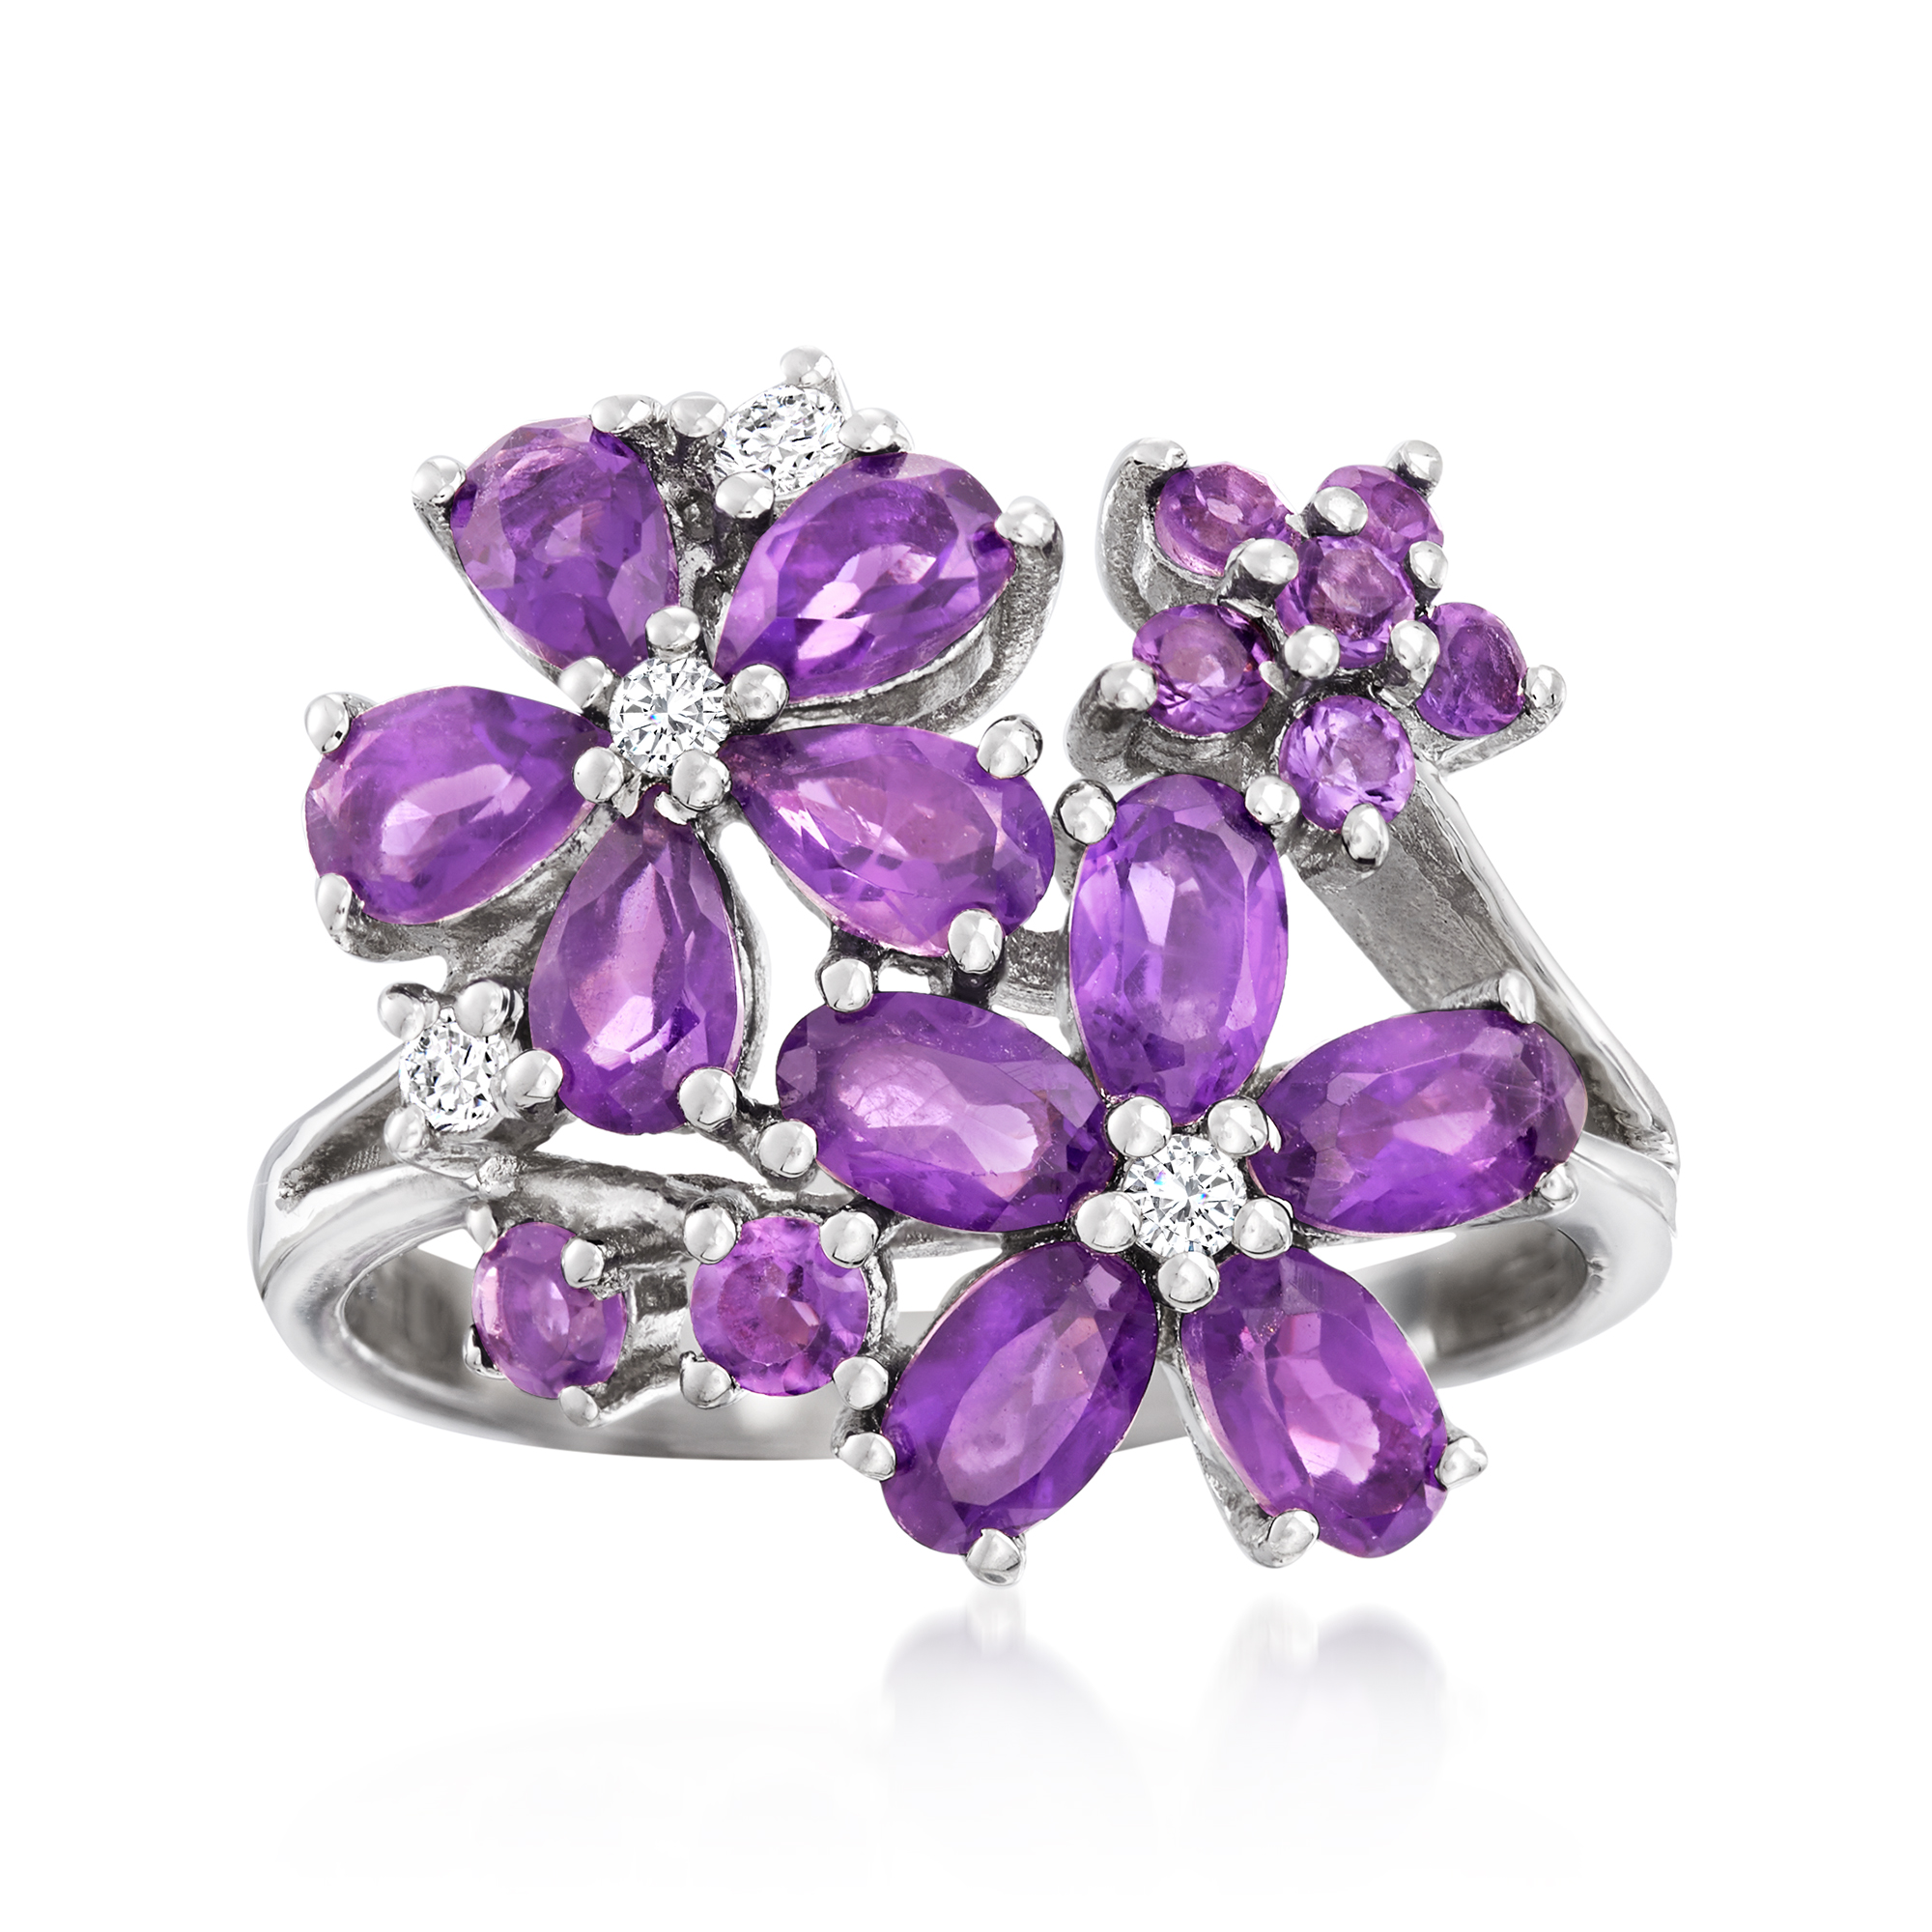 2.10 ct. t.w. Amethyst and .10 ct. t.w. White Zircon Flower Ring 